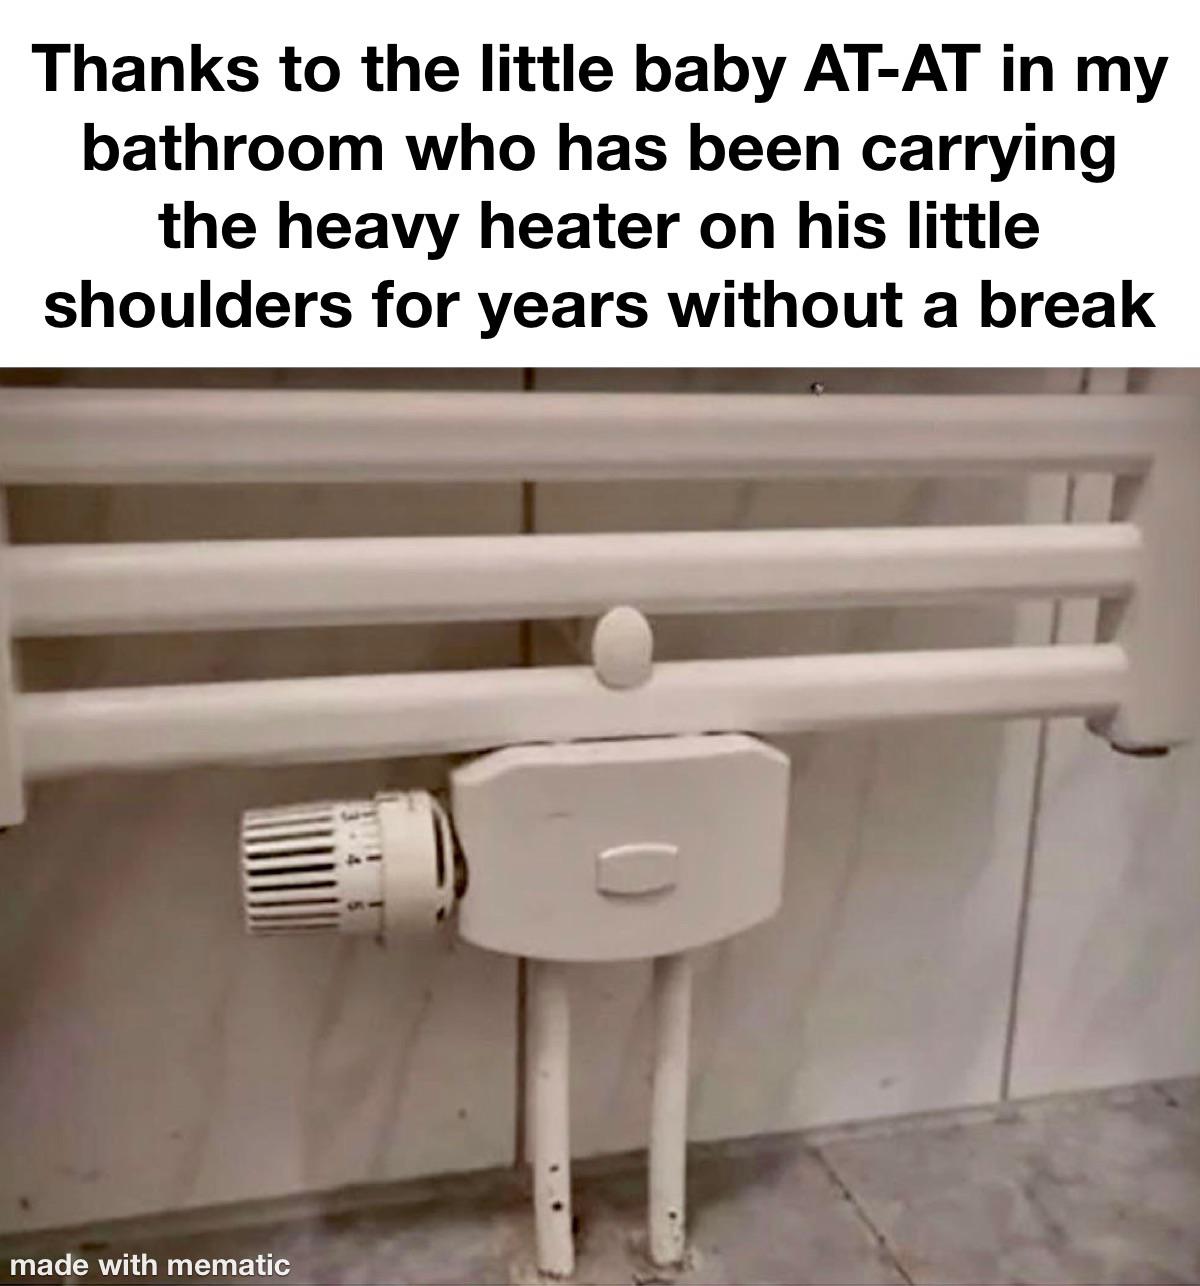 funny memes - Thanks to the little baby AtAt in my bathroom who has been carrying the heavy heater on his little shoulders for years without a break made with mematic